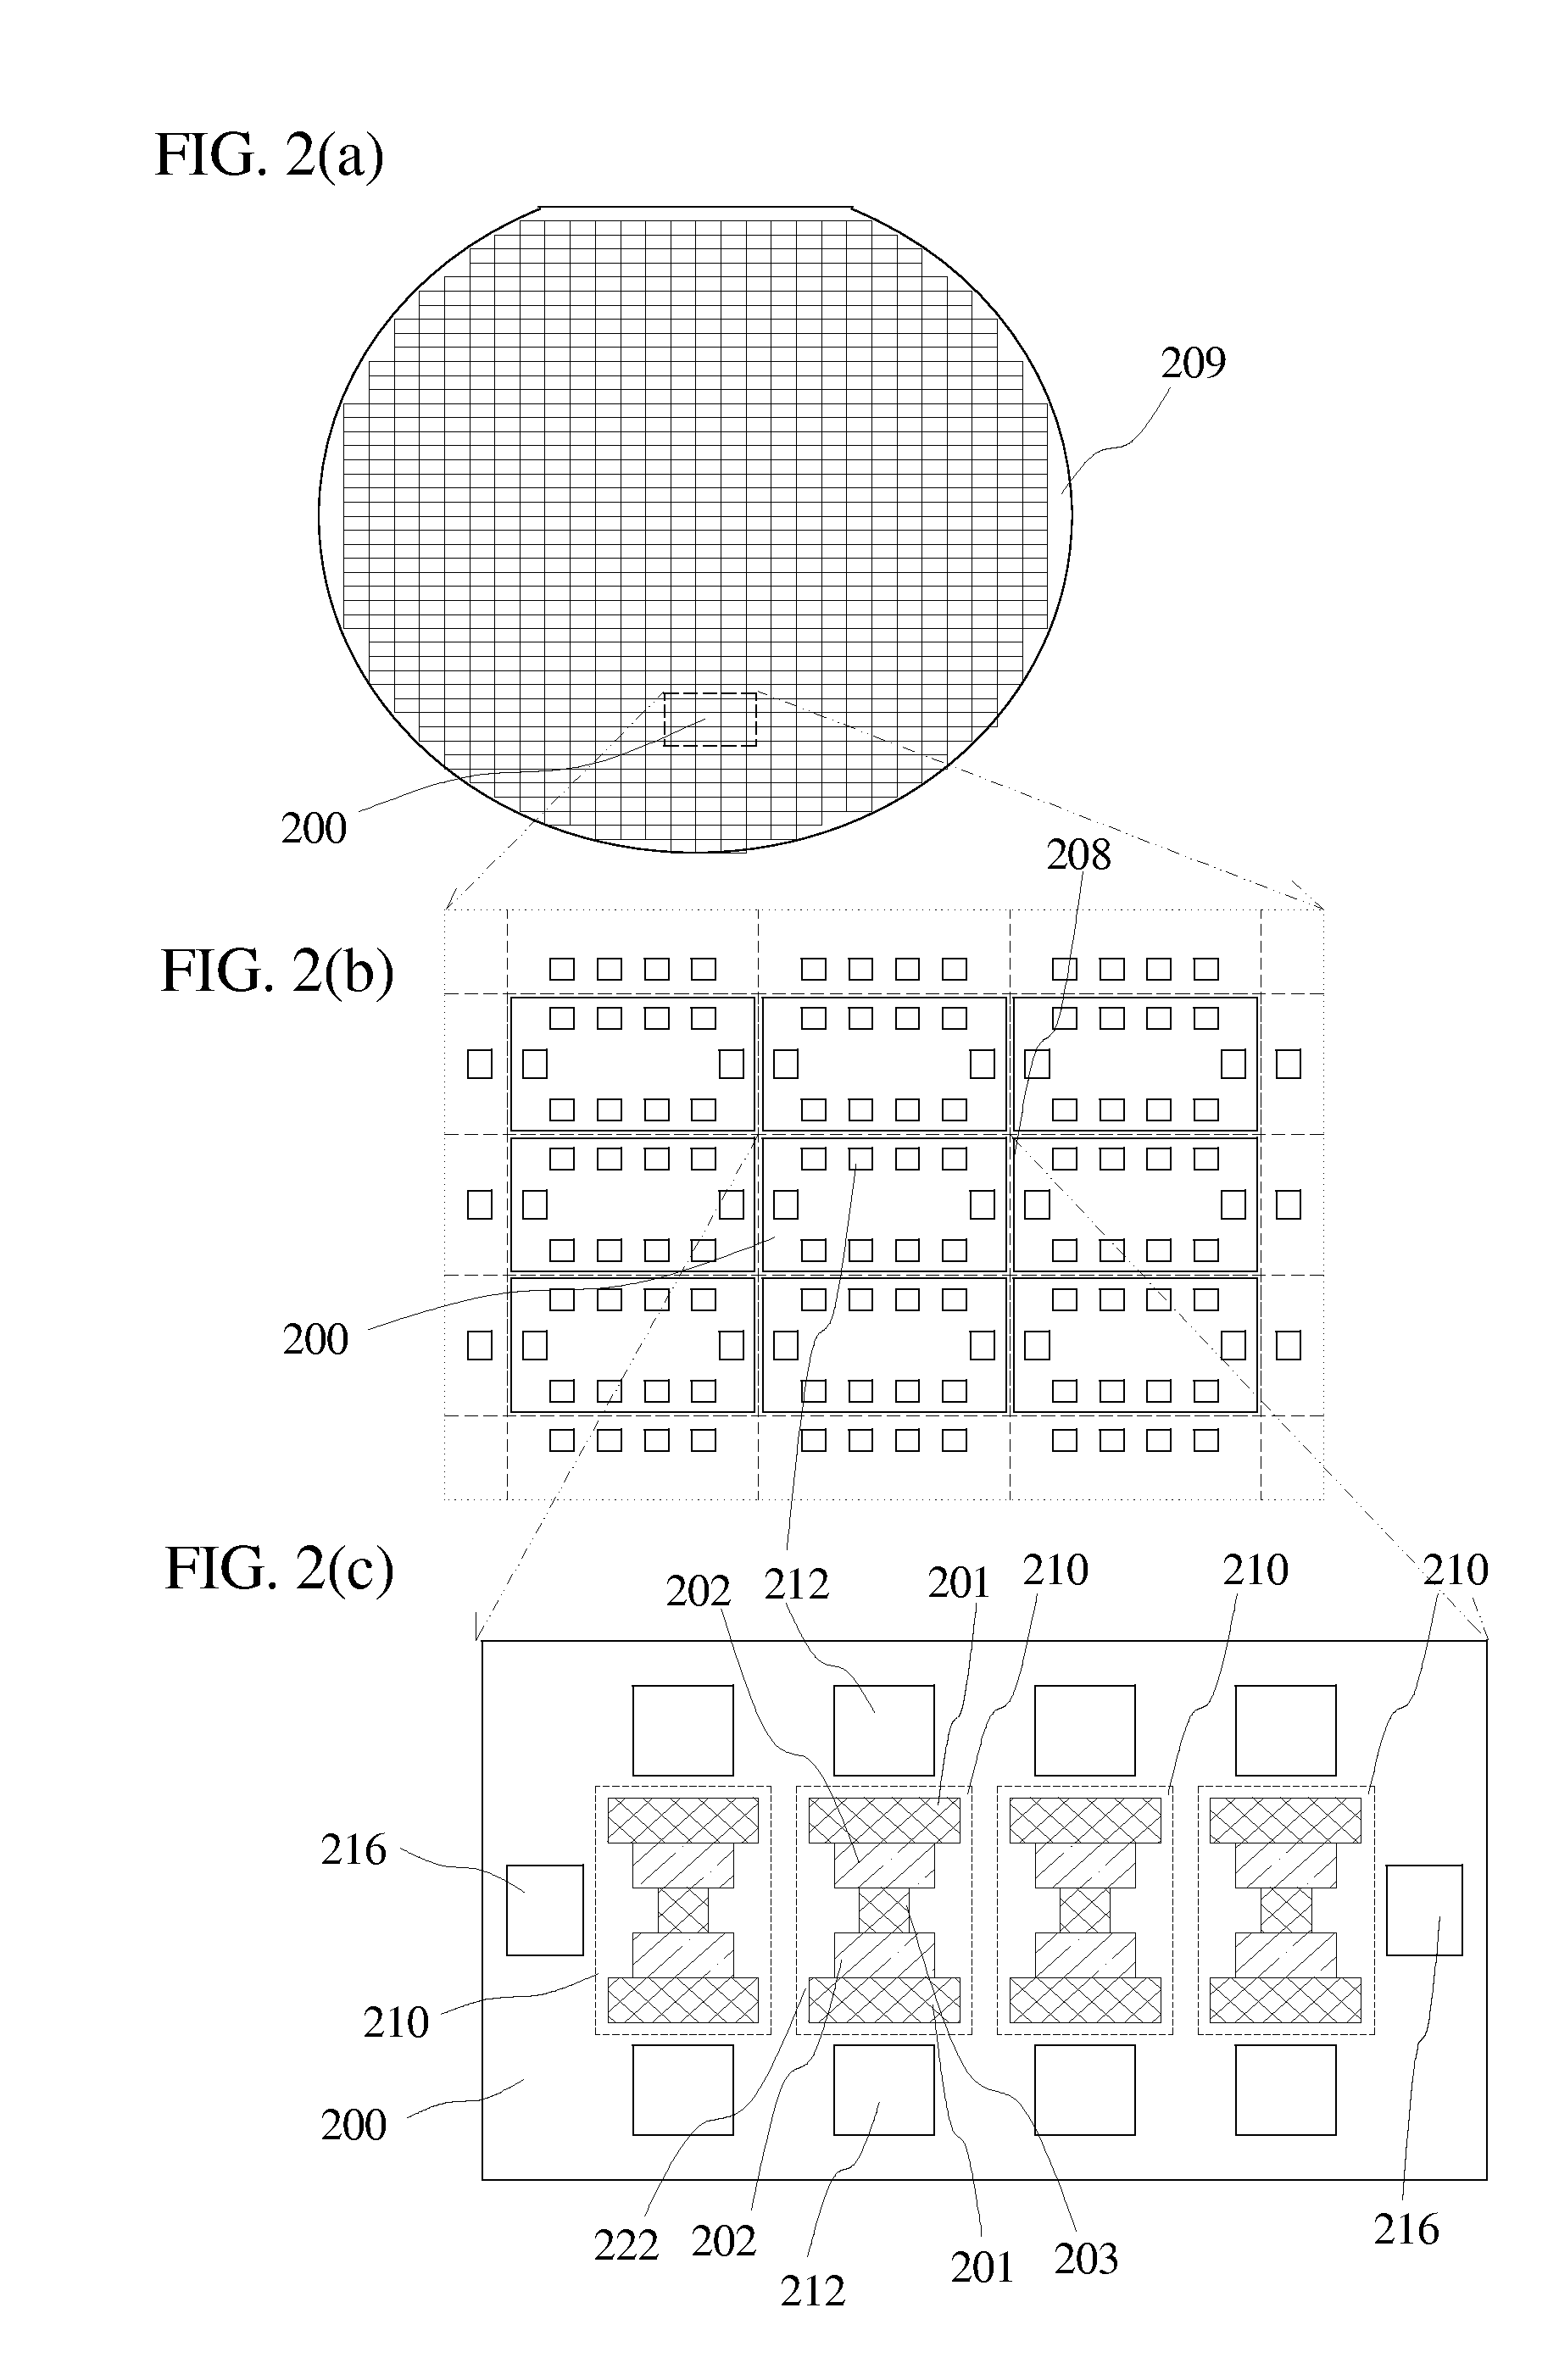 Area reduction for surface mount package chips